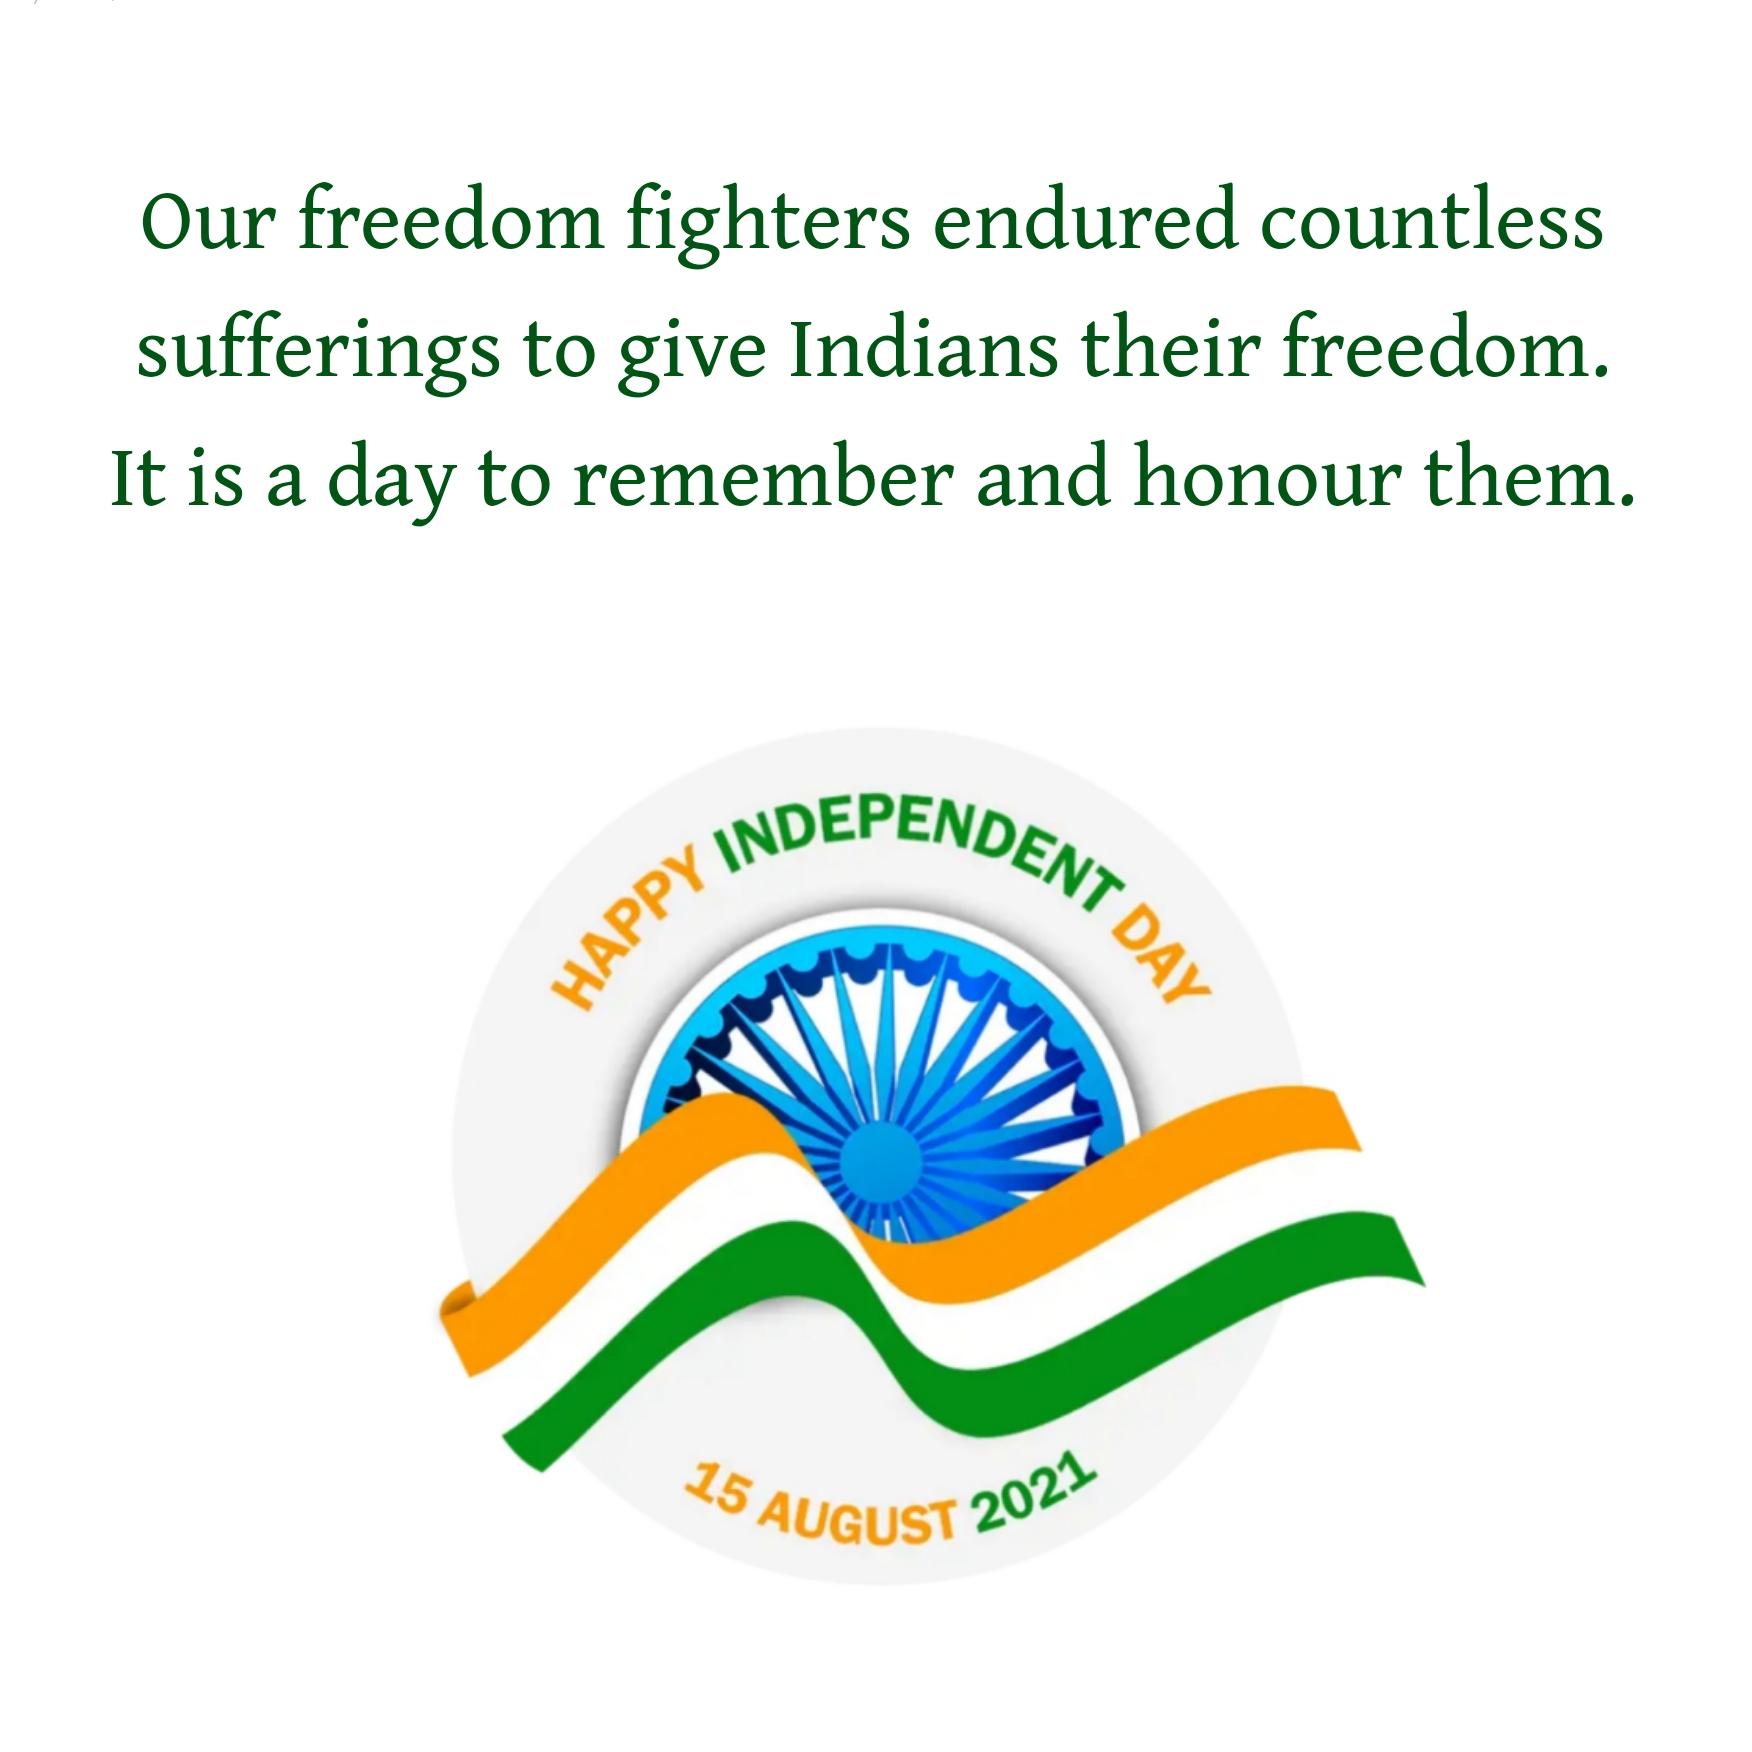 Our freedom fighters endured countless sufferings to give Indians their freedom